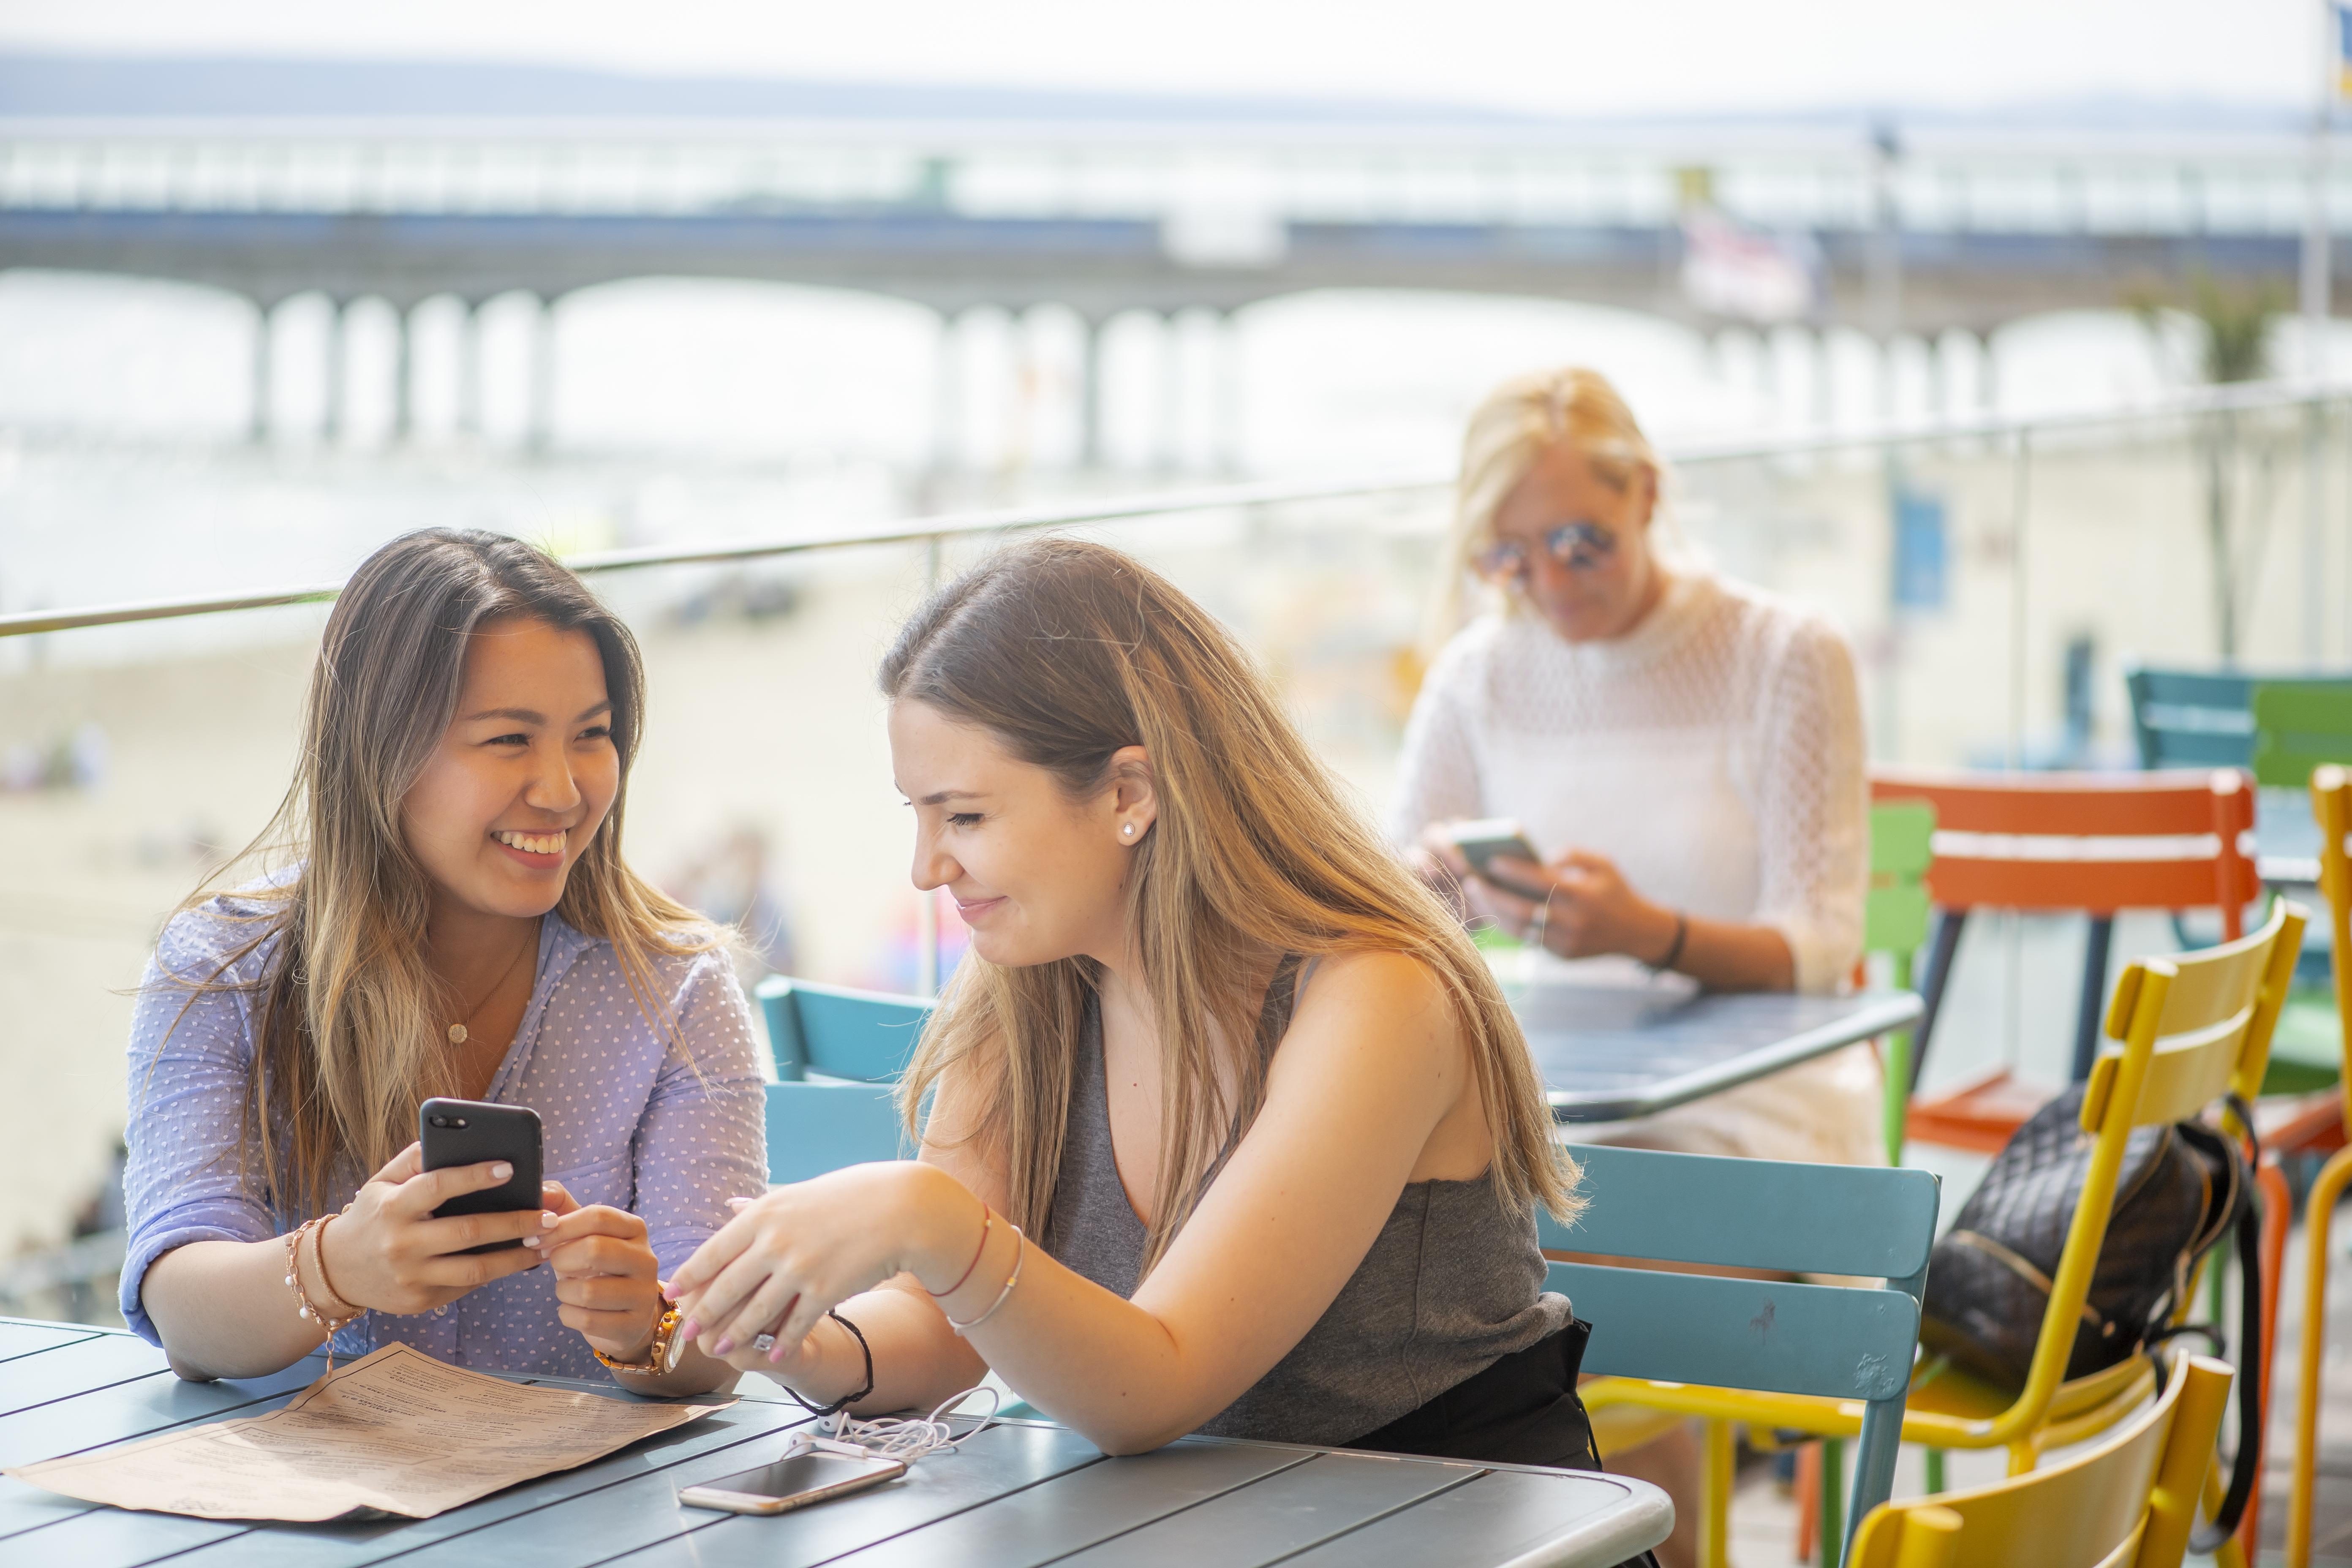 Two female students looking at their phones at a Boscombe beach side food place